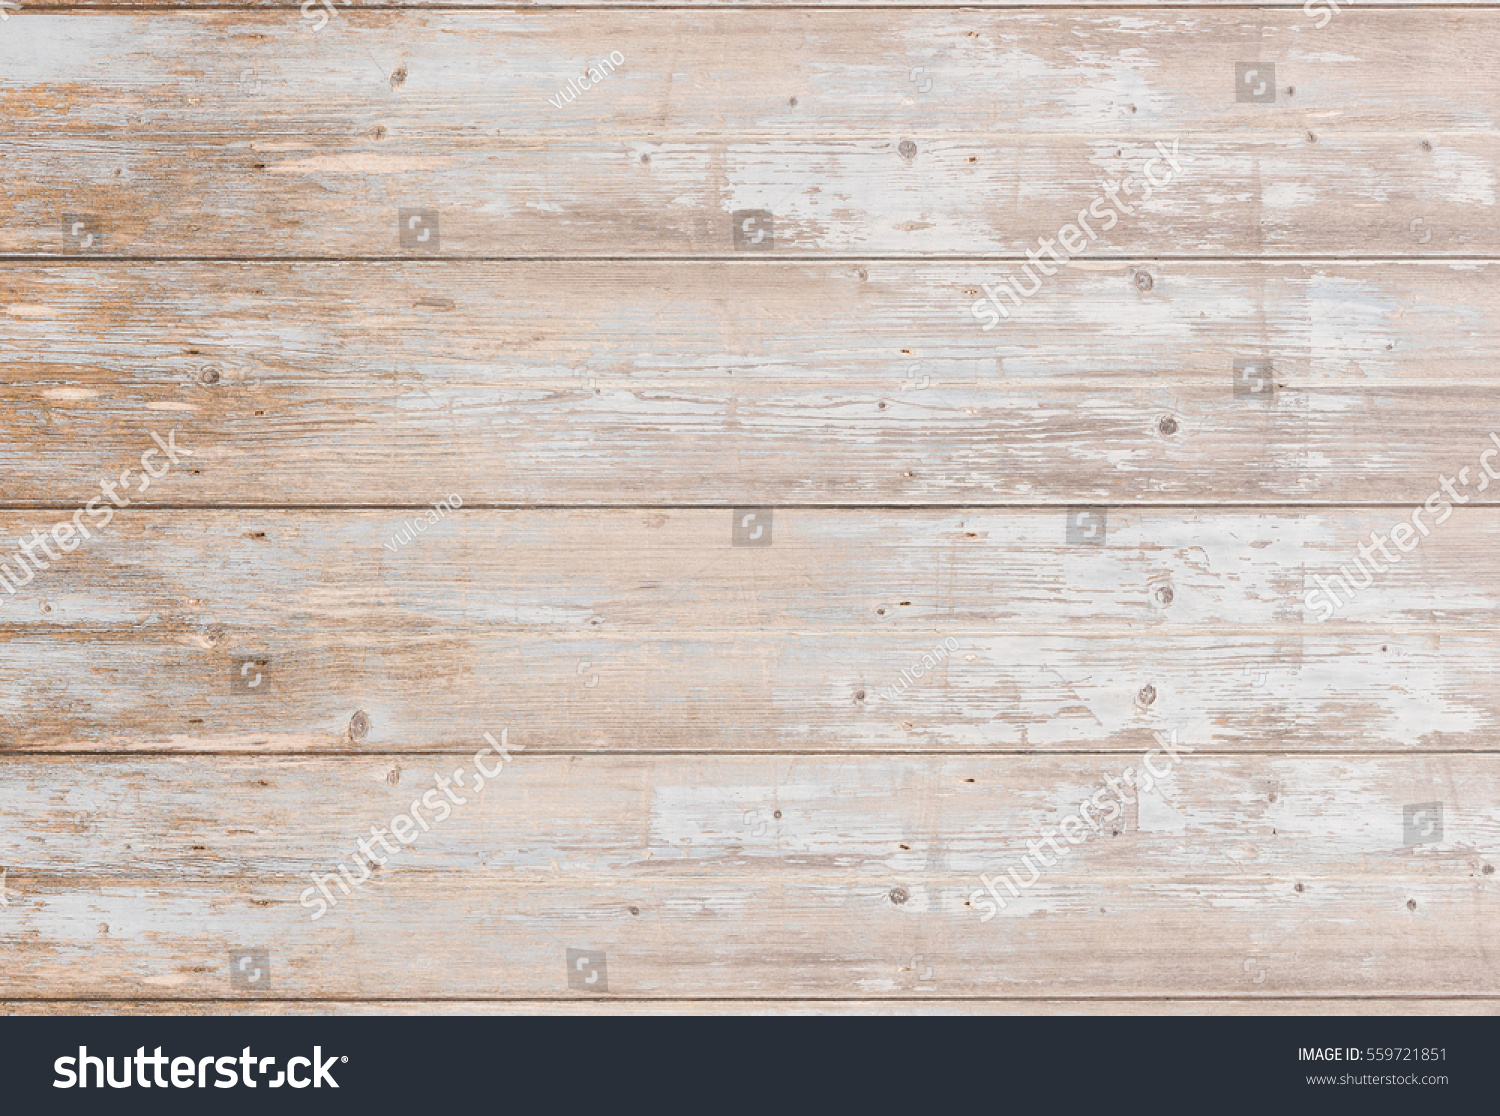 Vintage wooden background, shabby painted wood texture. #559721851